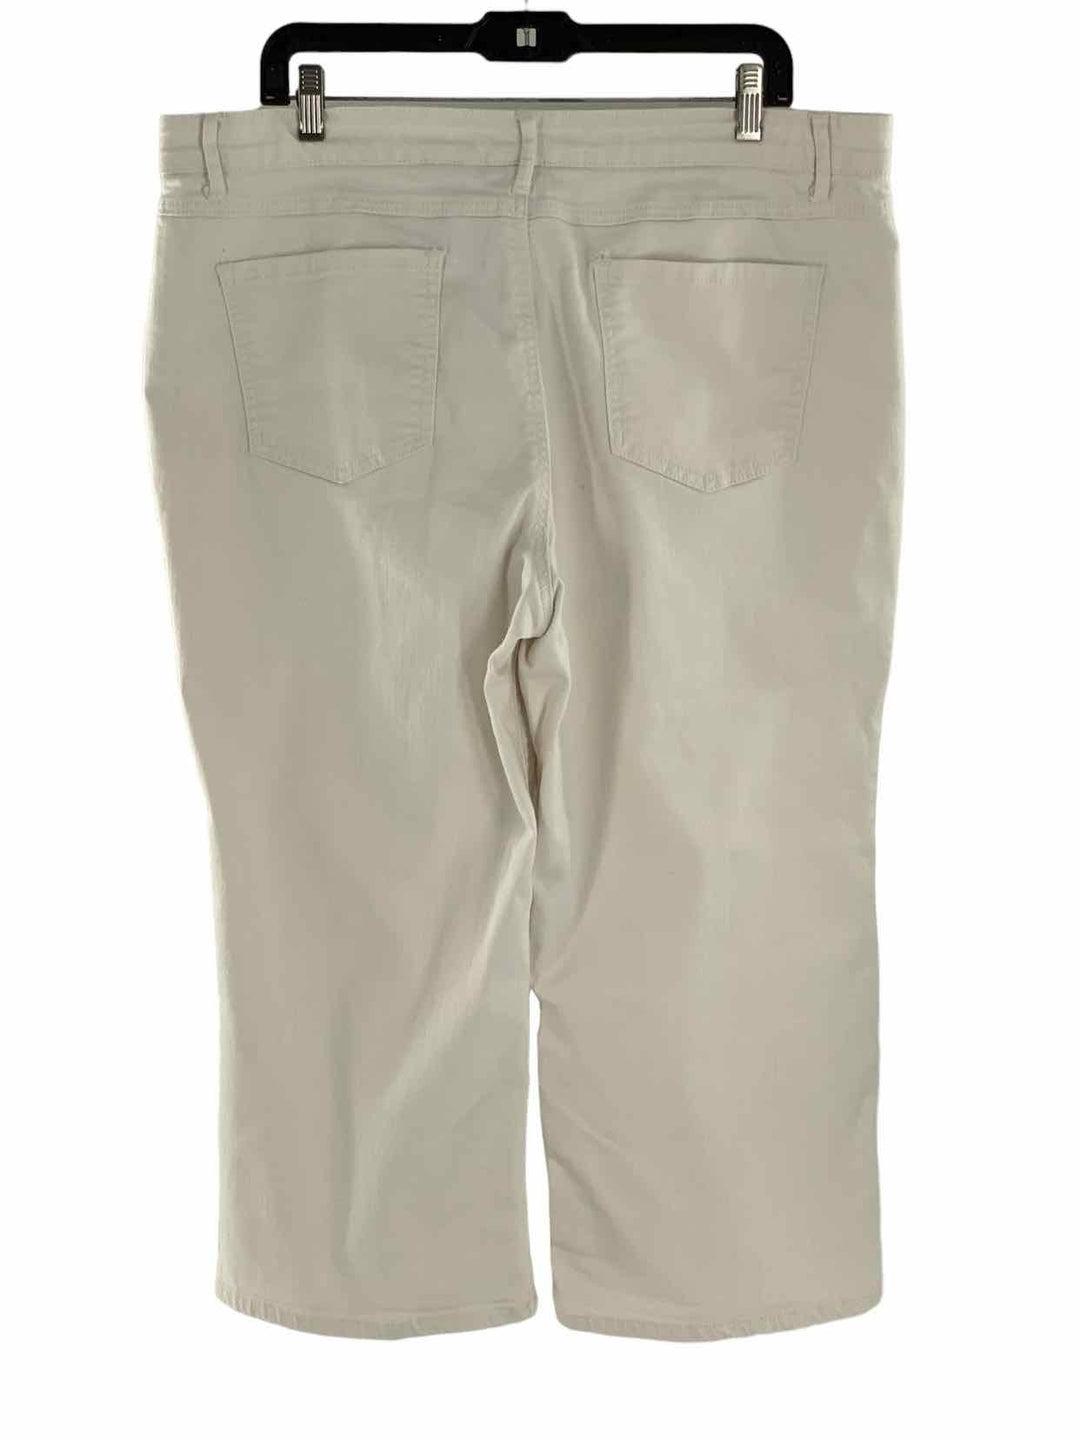 Ruby Rd Size 18 White Jeans